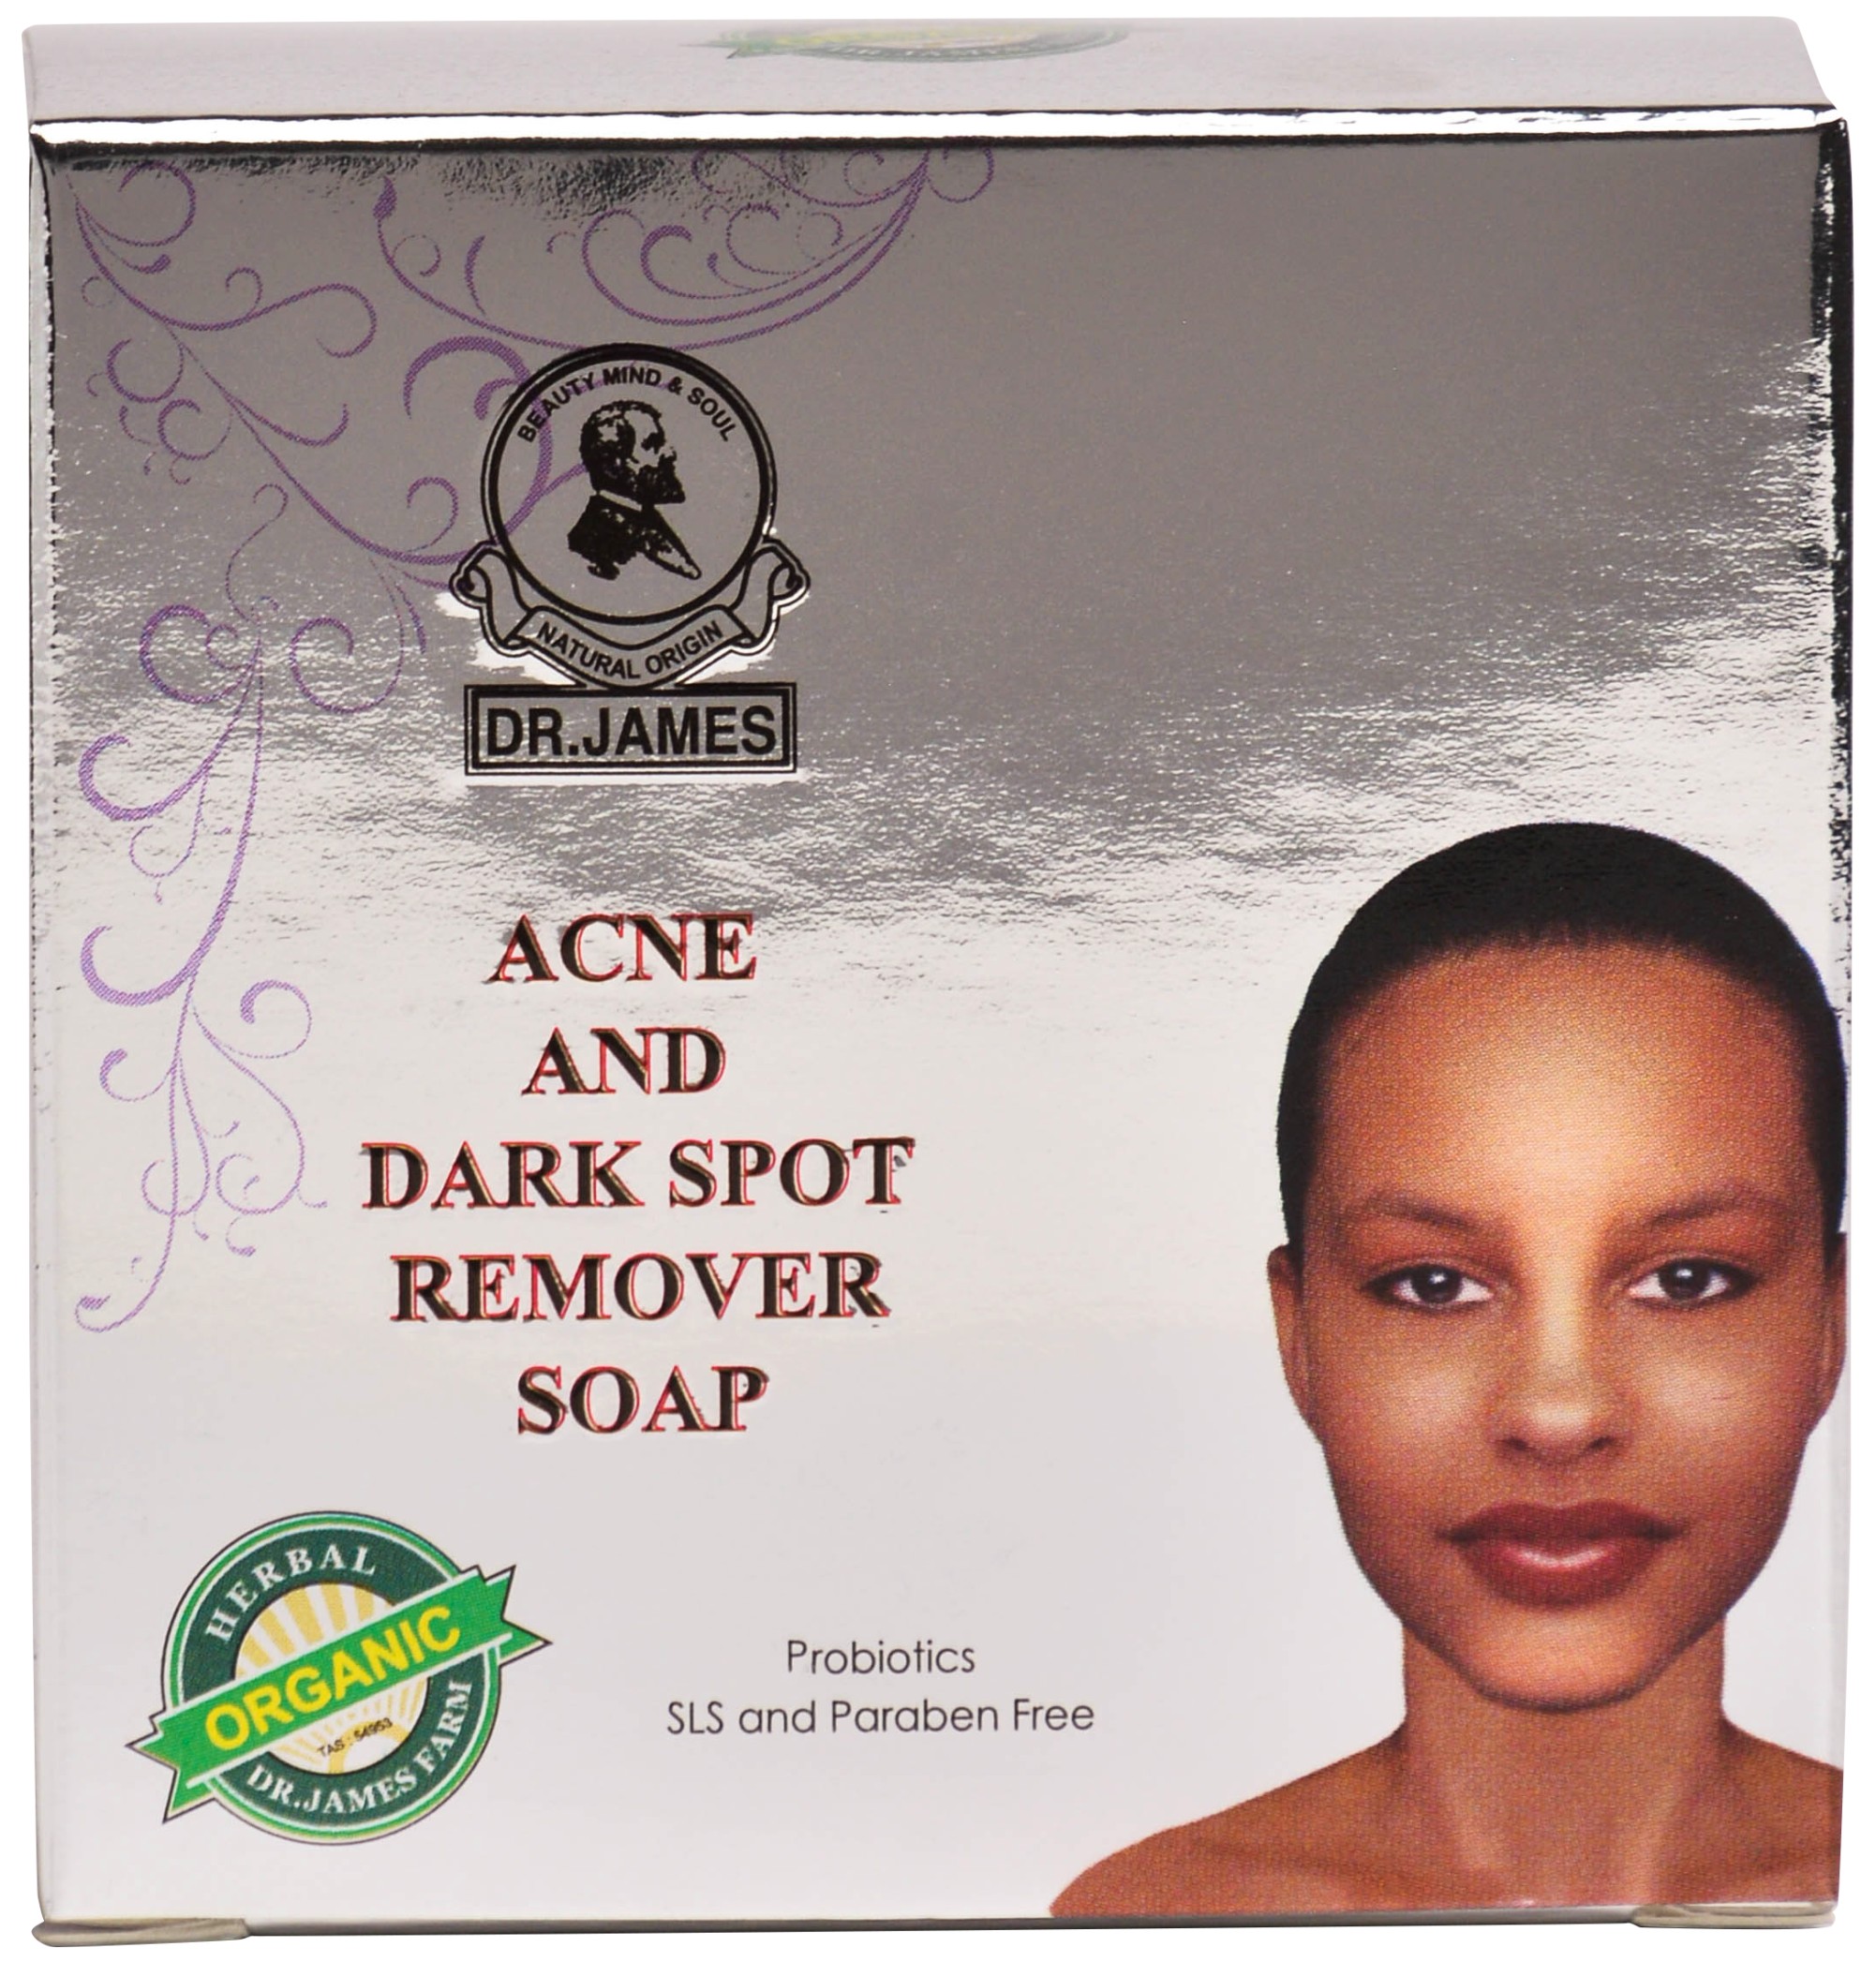 S27 DR.JAMES ACNE AND DARK SPOT REMOVER SOAP 80g.